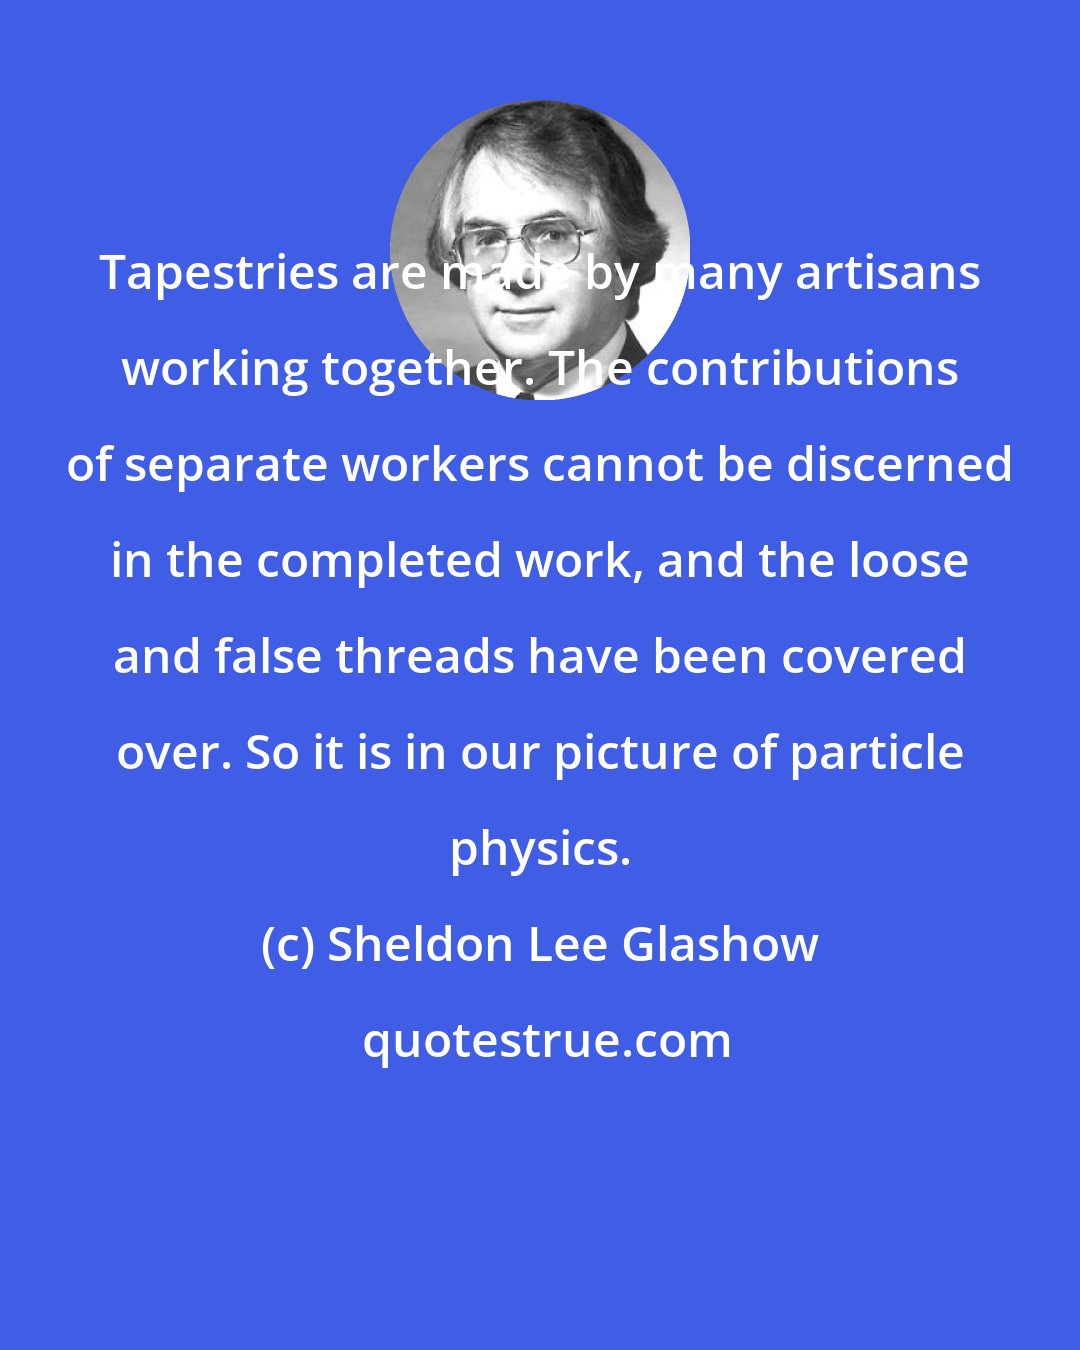 Sheldon Lee Glashow: Tapestries are made by many artisans working together. The contributions of separate workers cannot be discerned in the completed work, and the loose and false threads have been covered over. So it is in our picture of particle physics.